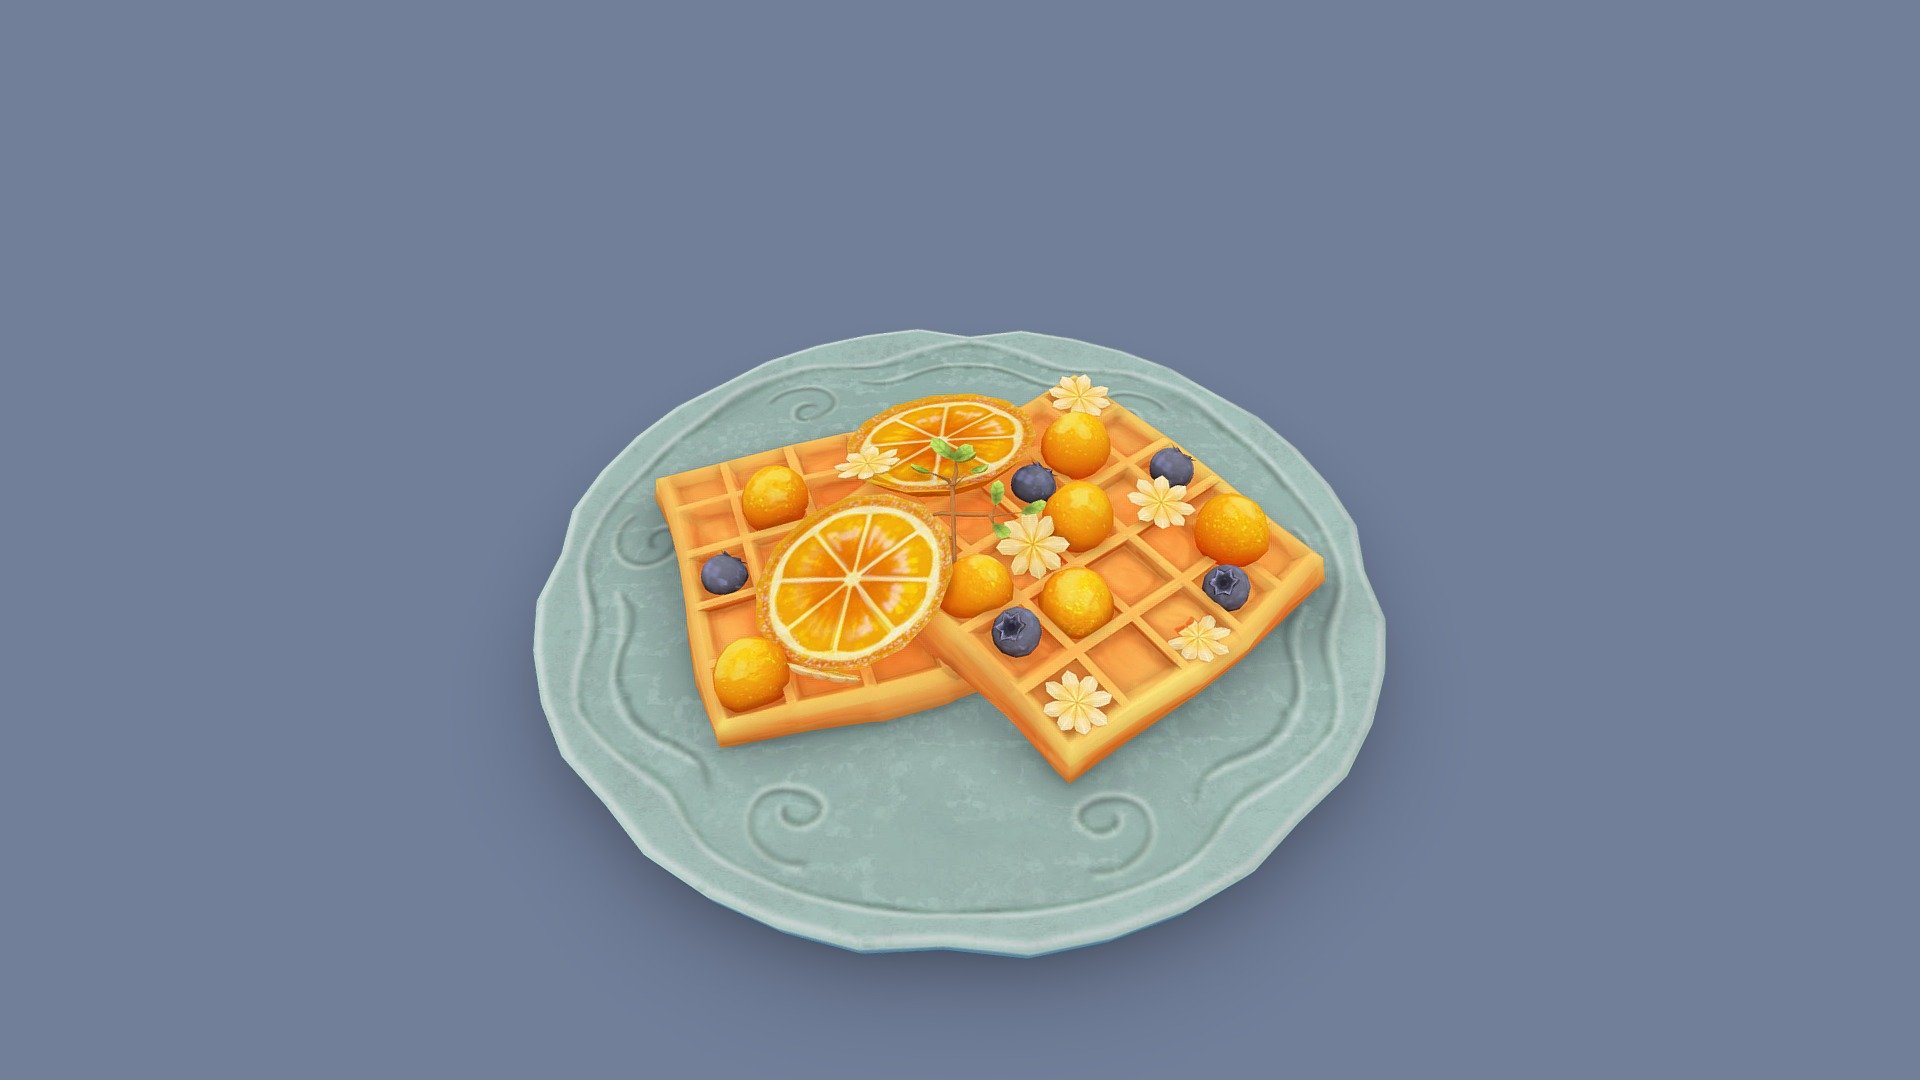 Taste waffles with blueberries and oranges :)
Used maya and substance hand paint - Waffle - 3D model by nettacx 3d model